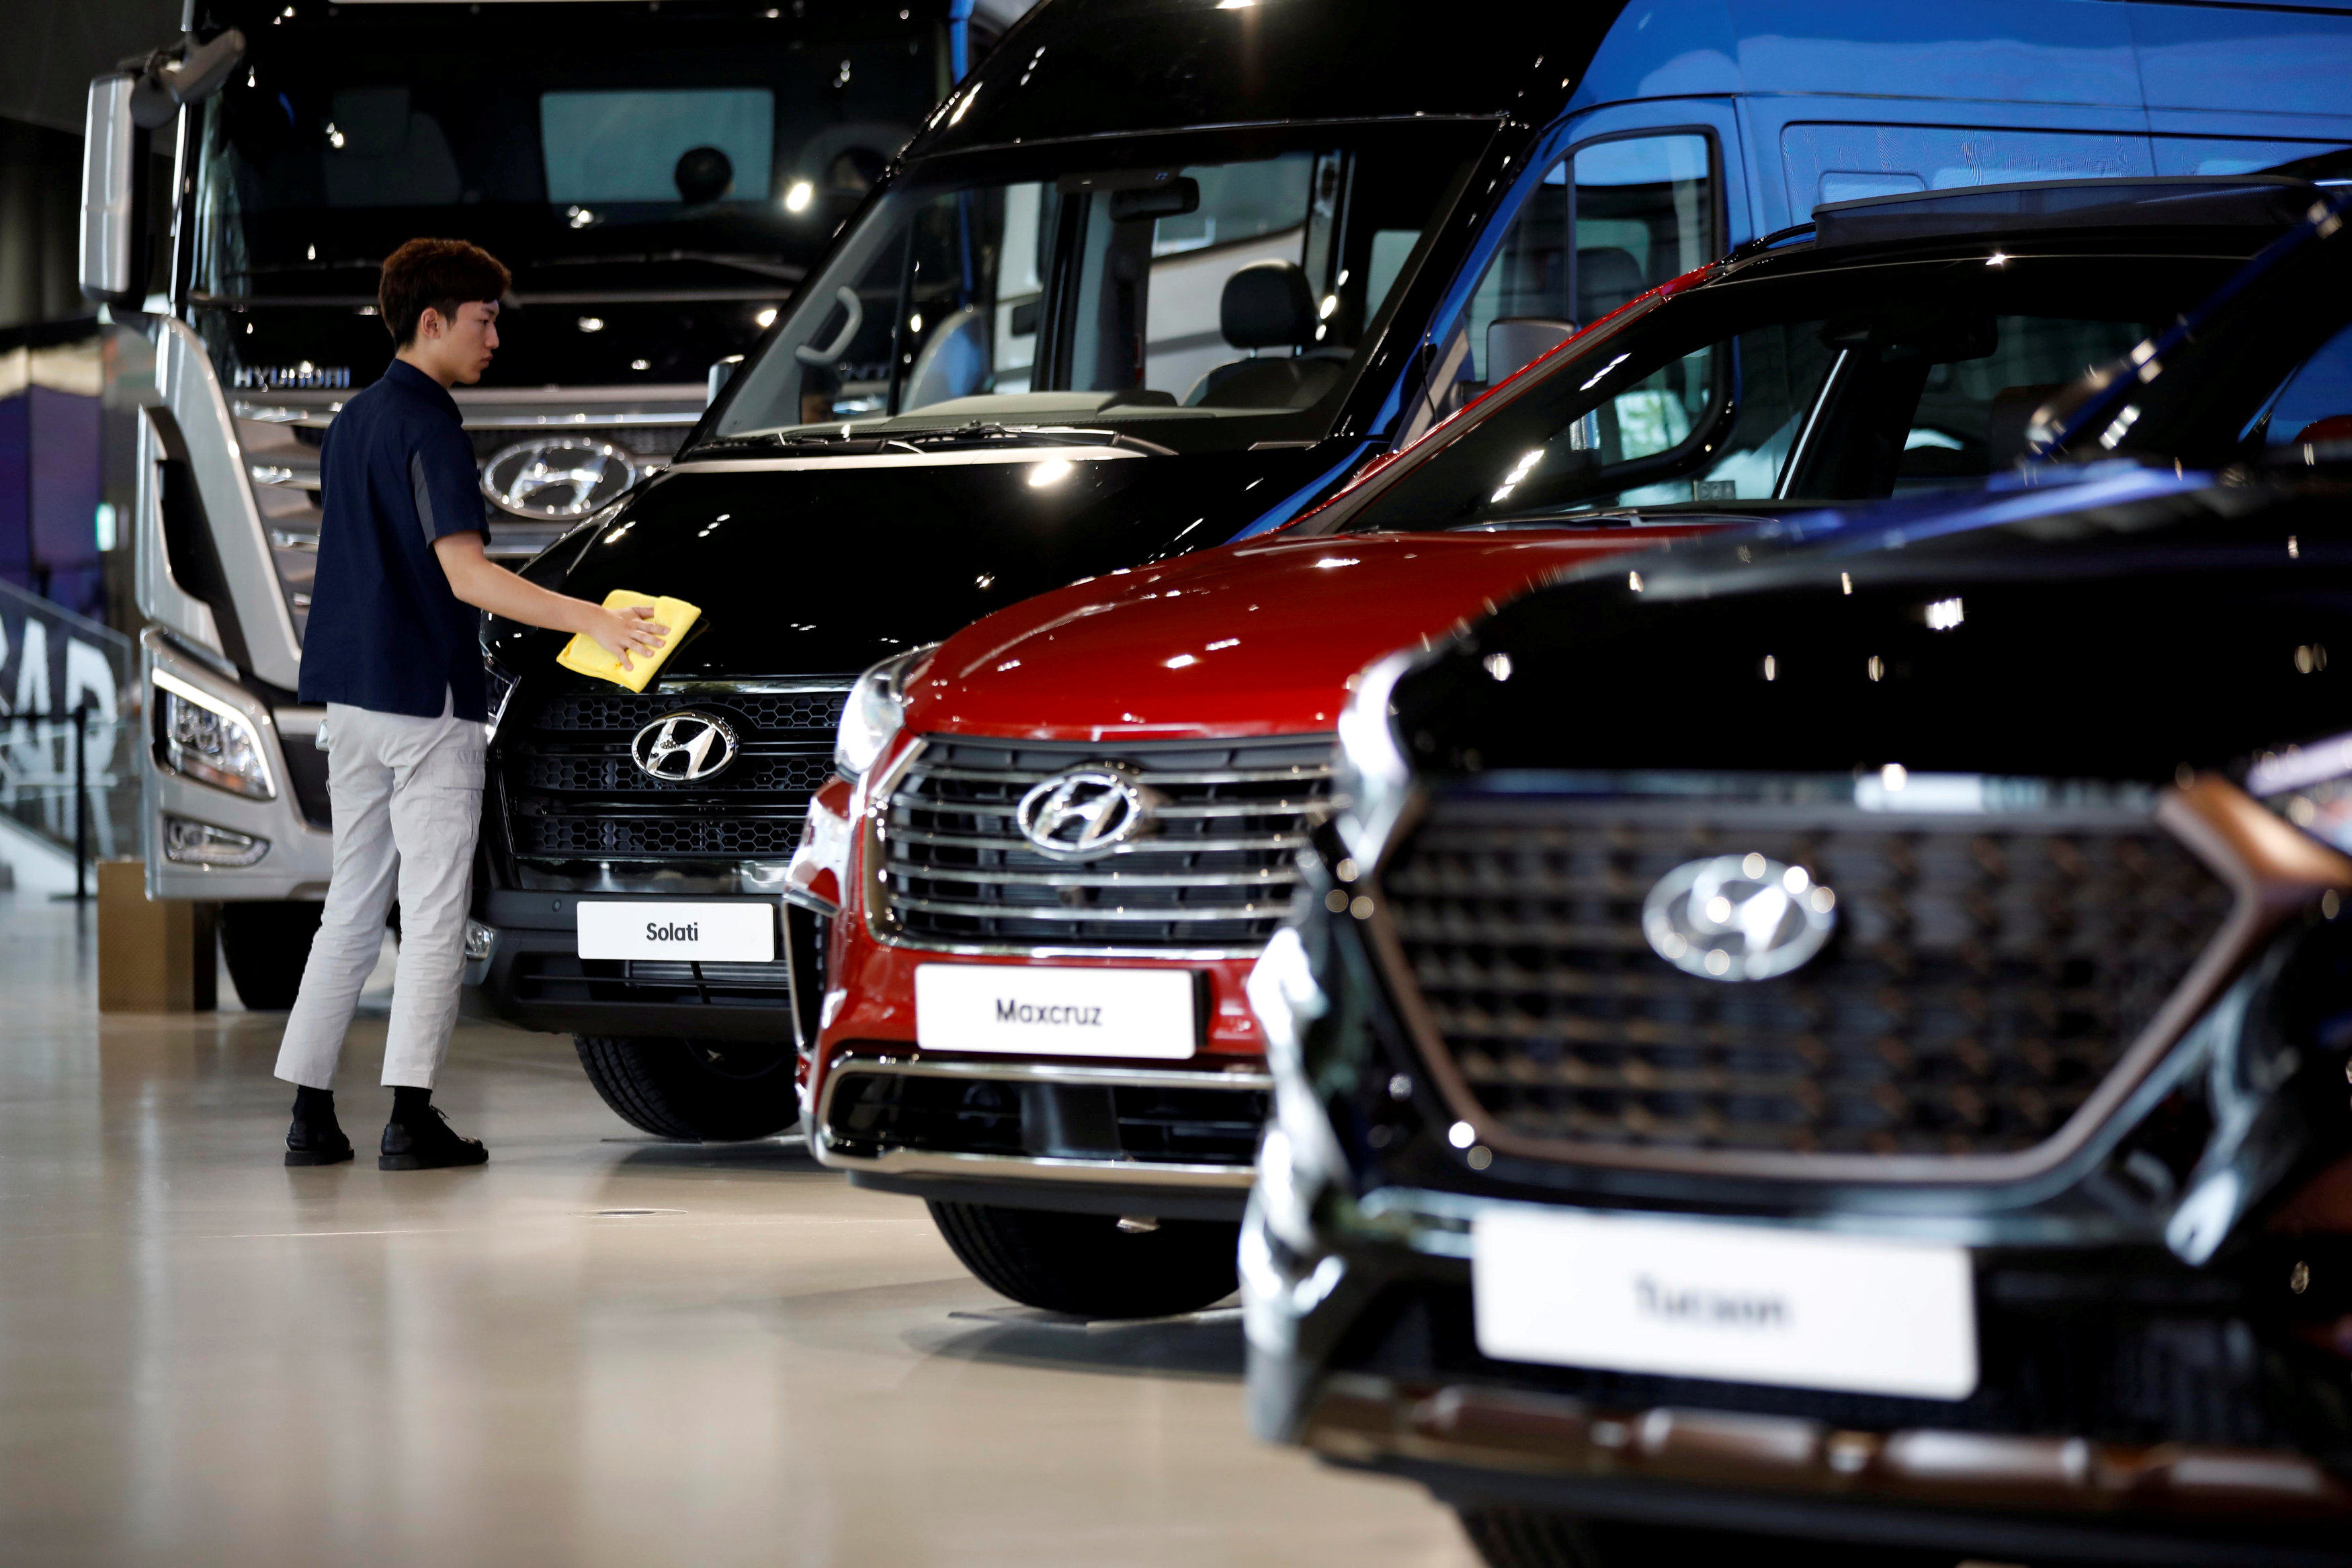 South Korean companies face intensifying competition from their Chinese counterparts for share of the global car market. Photo: Reuters